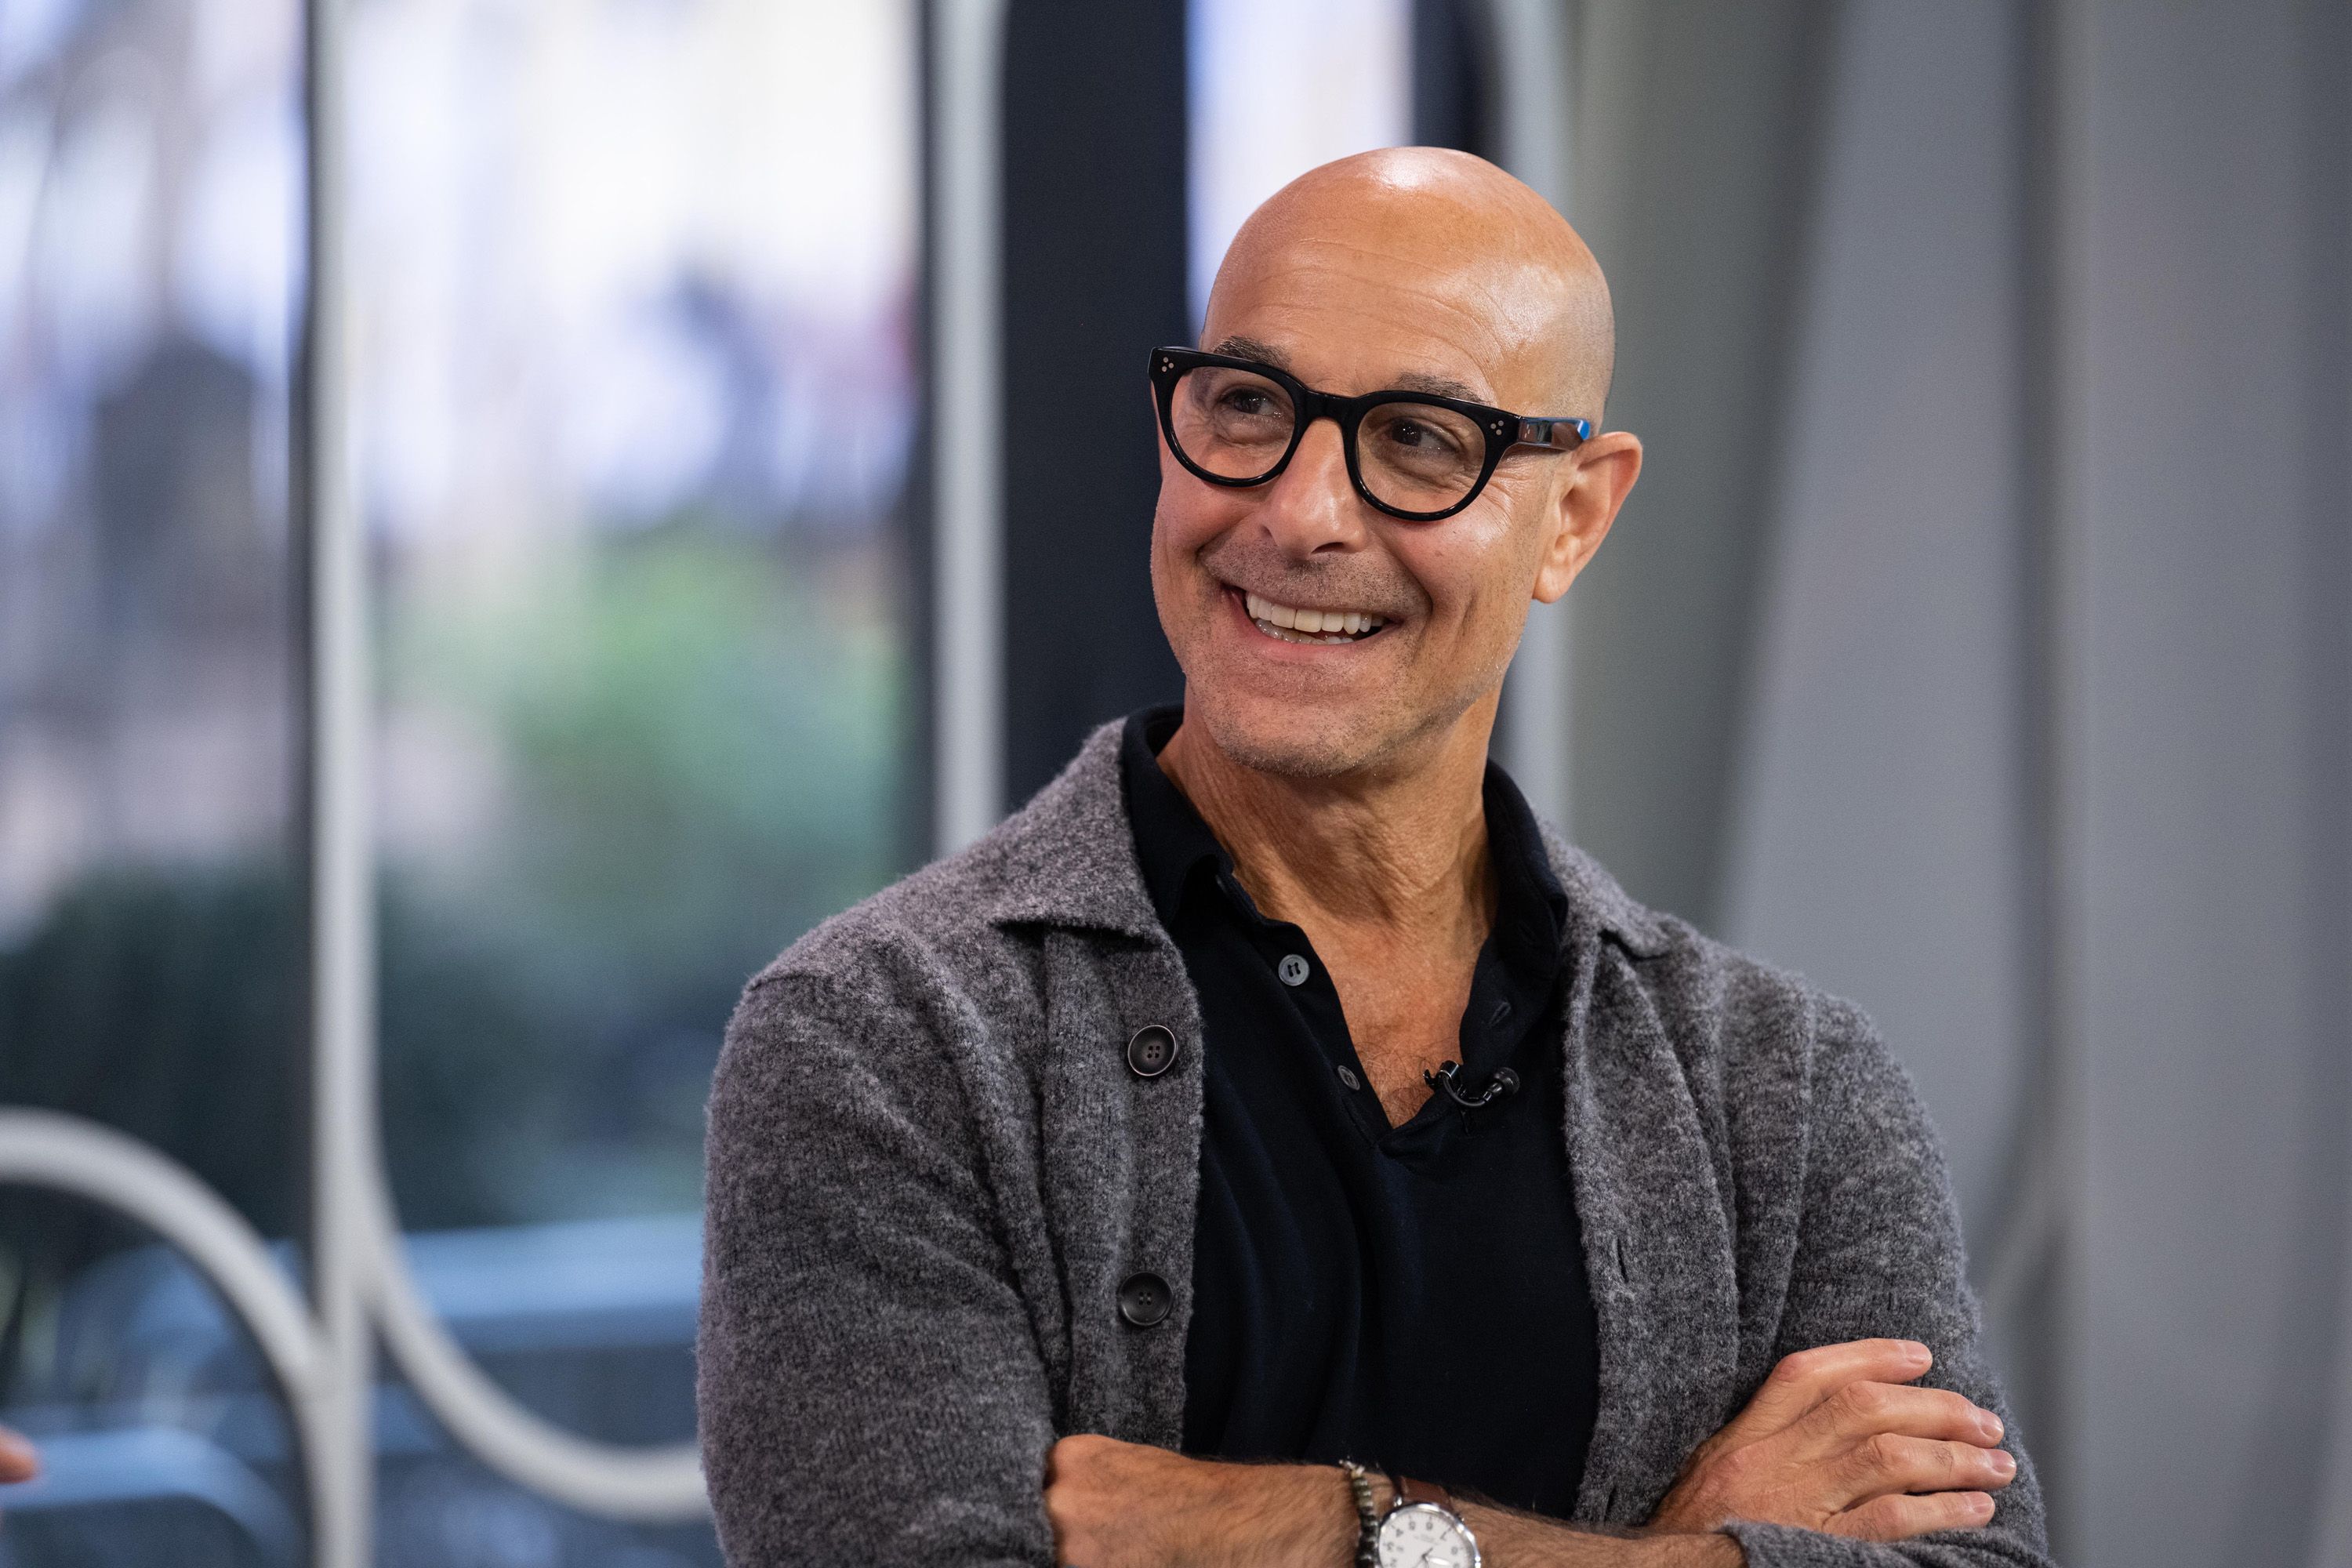 The One Piece from Stanley Tucci's New Cookware Line You Should